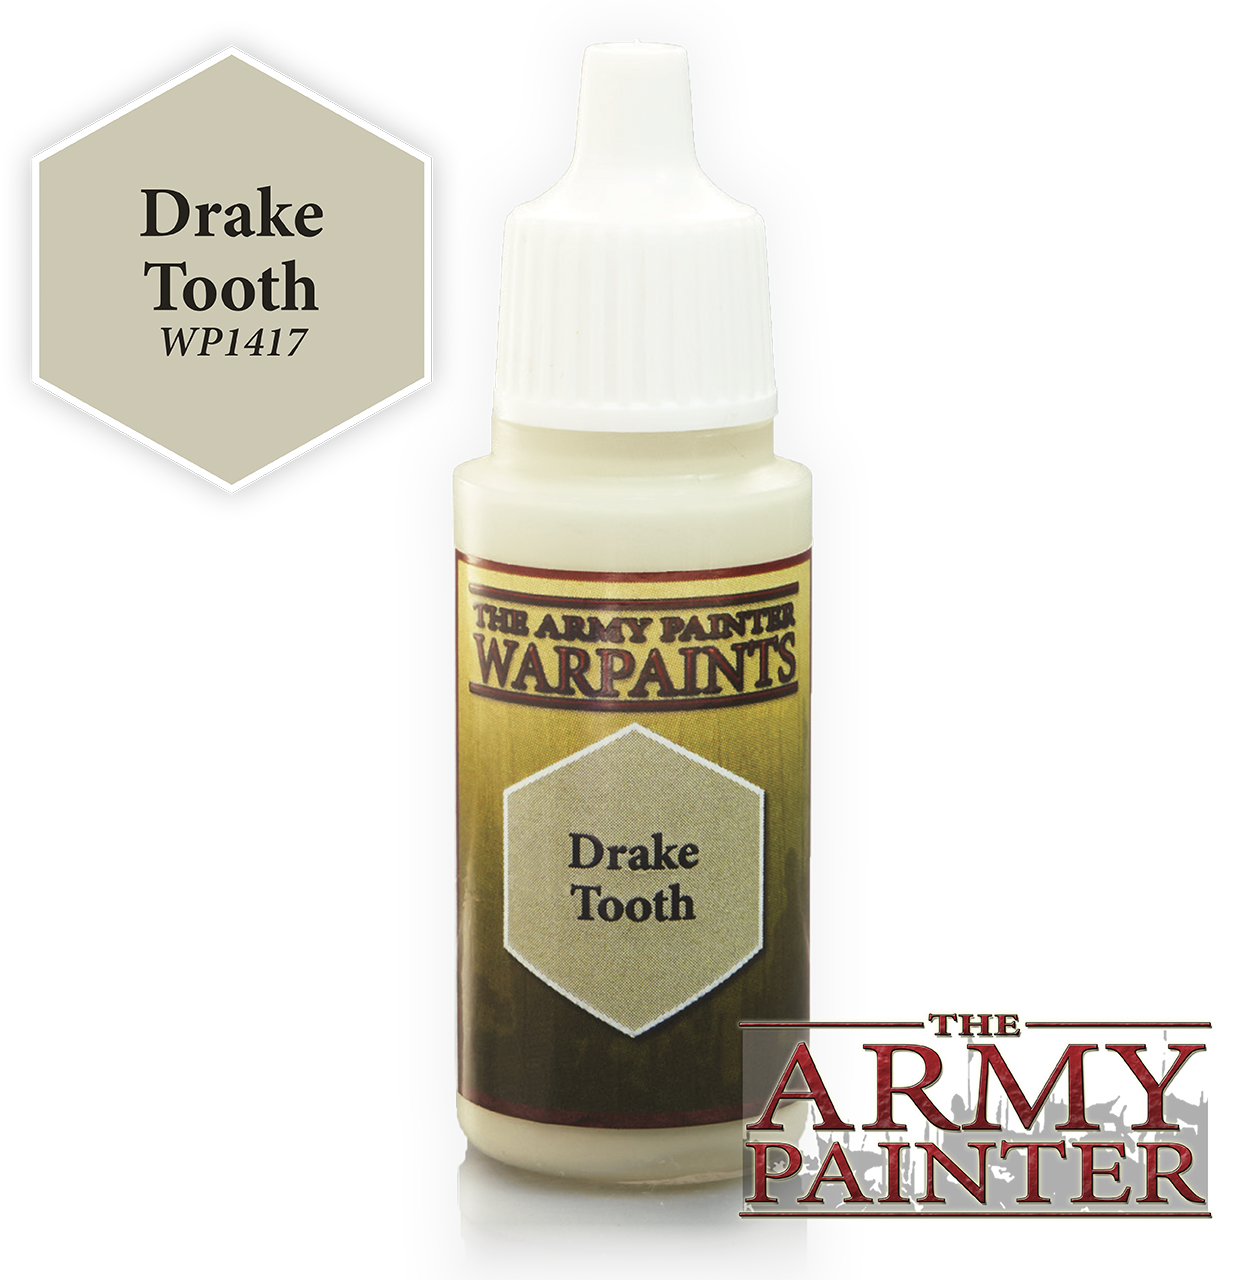 The ARMY PAINTER: Acrylics Warpaint - Drake Tooth | Tacoma Games